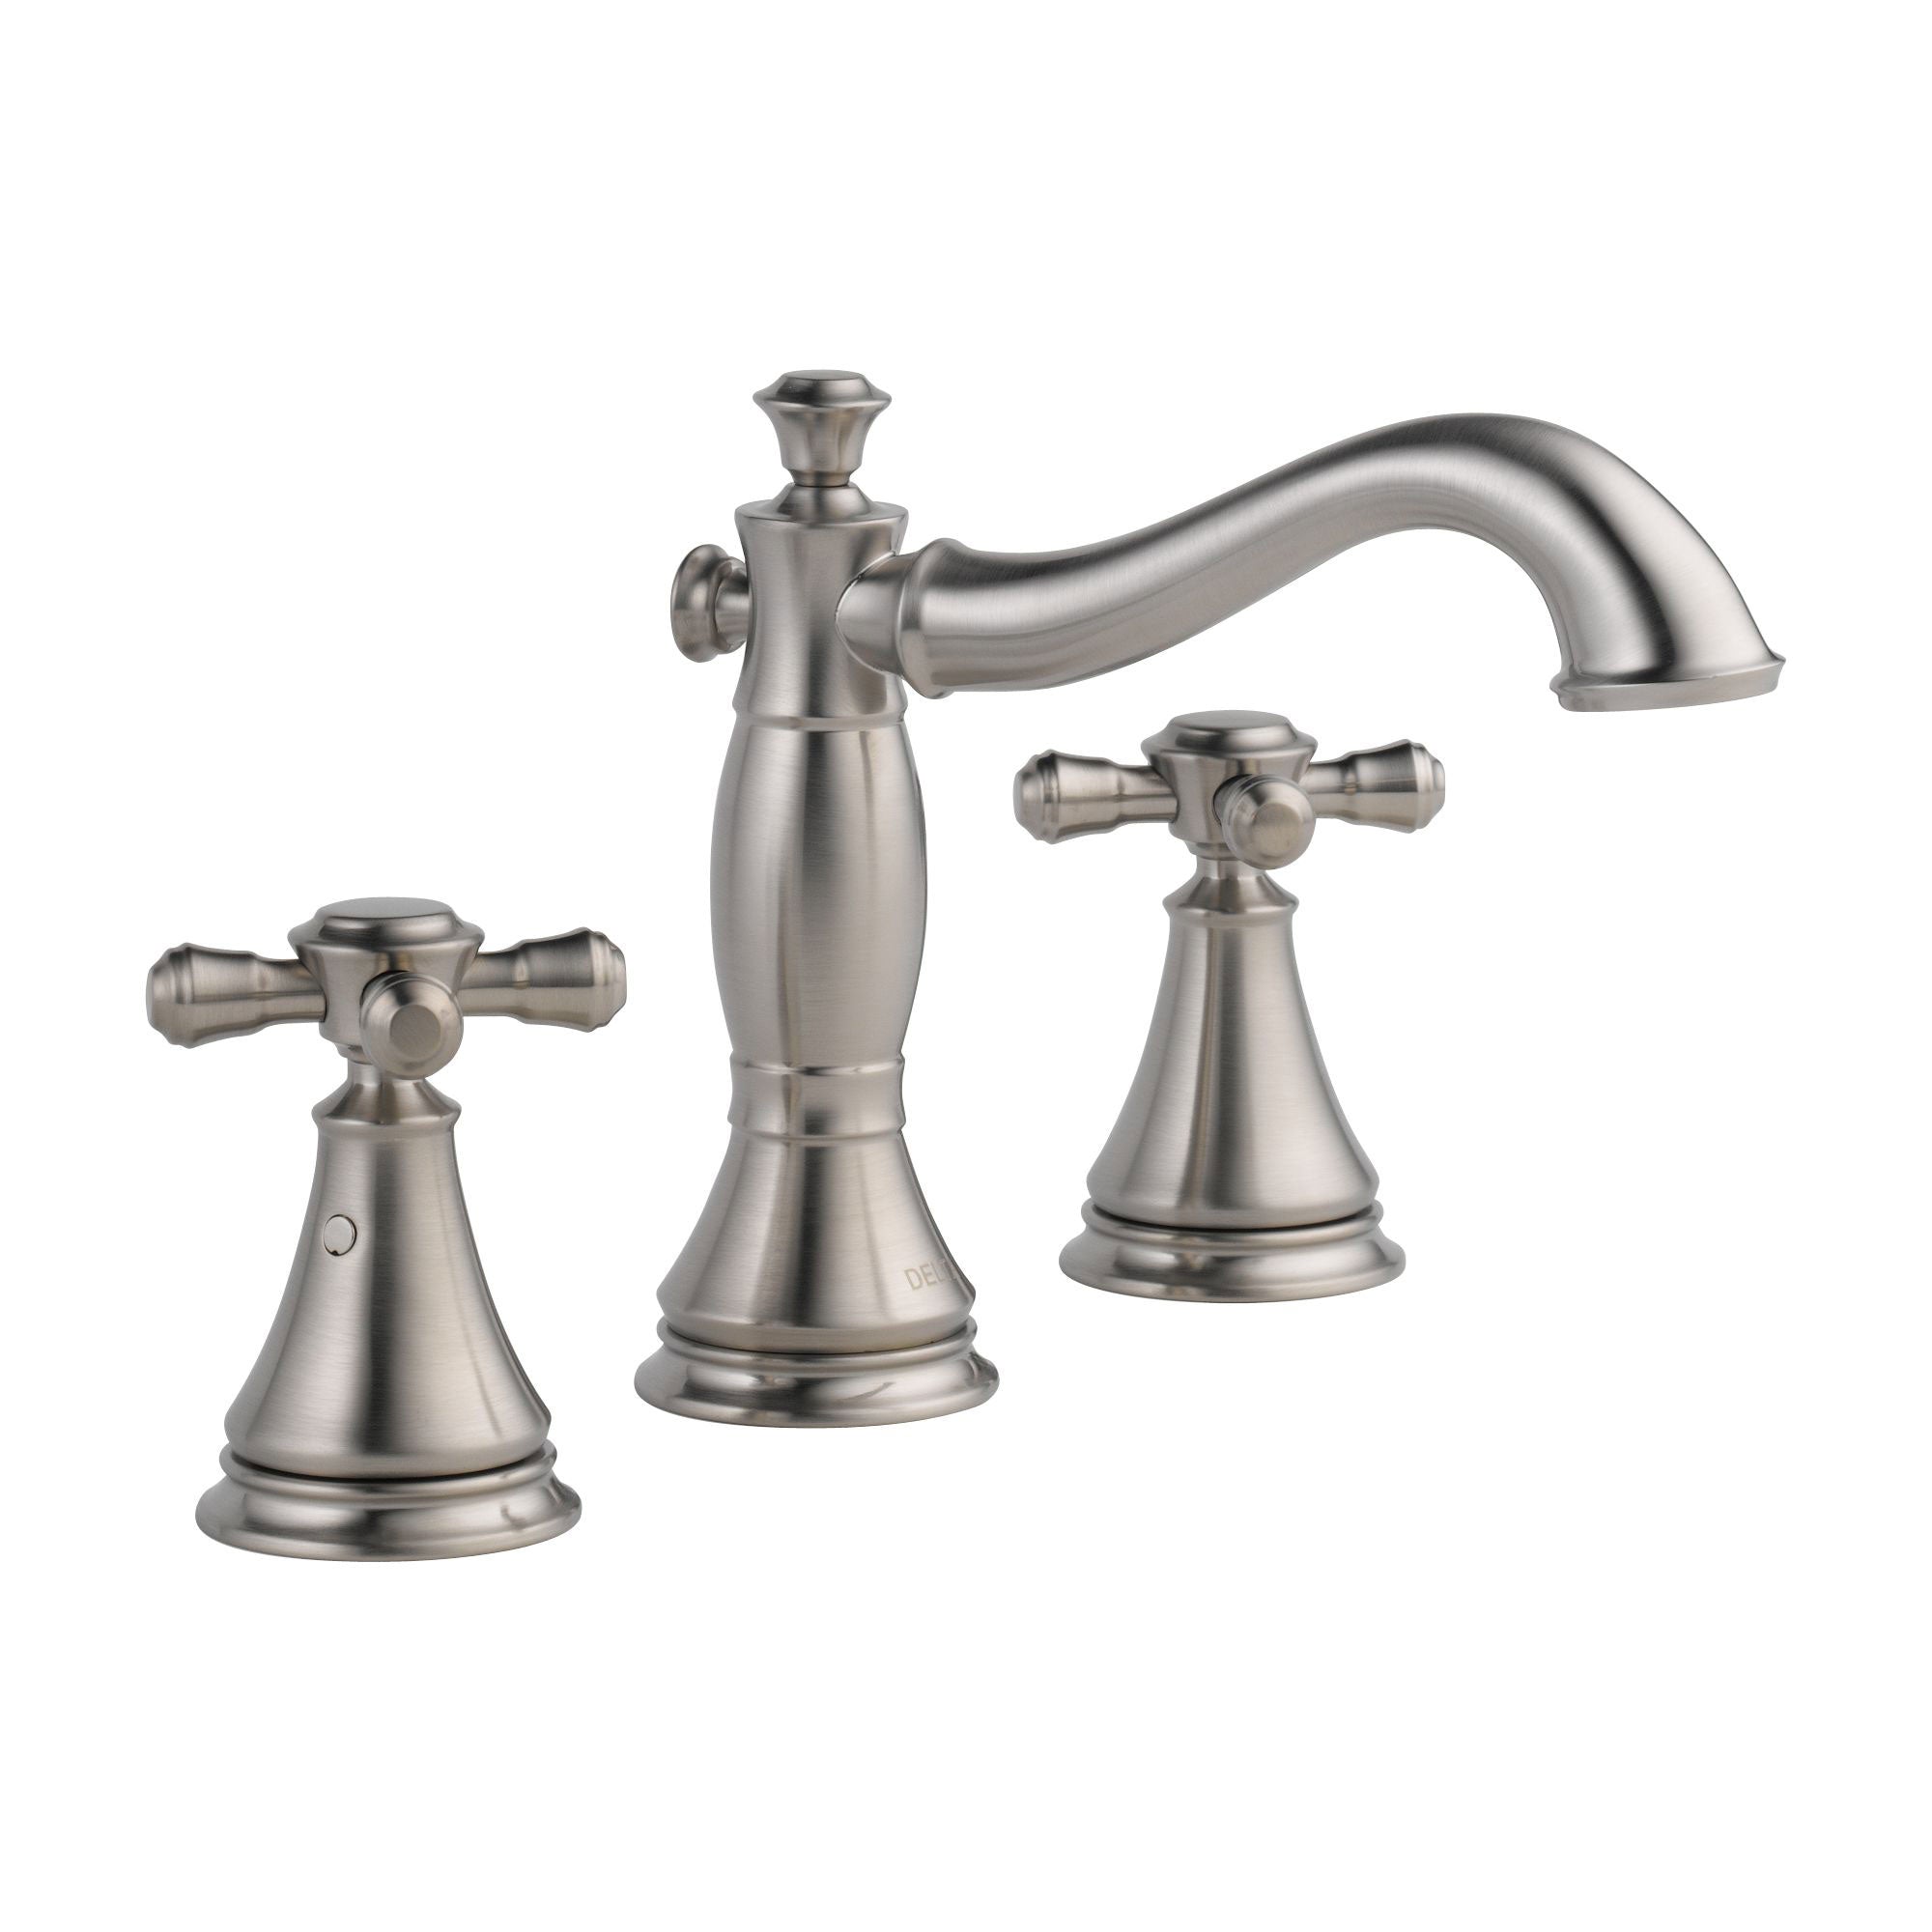 Delta Cassidy Stainless Steel Finish Wide Spread Lavatory Bathroom Sink Faucet INCLUDES Two Cross Handles and Matching Metal Pop-Up Drain D1304V